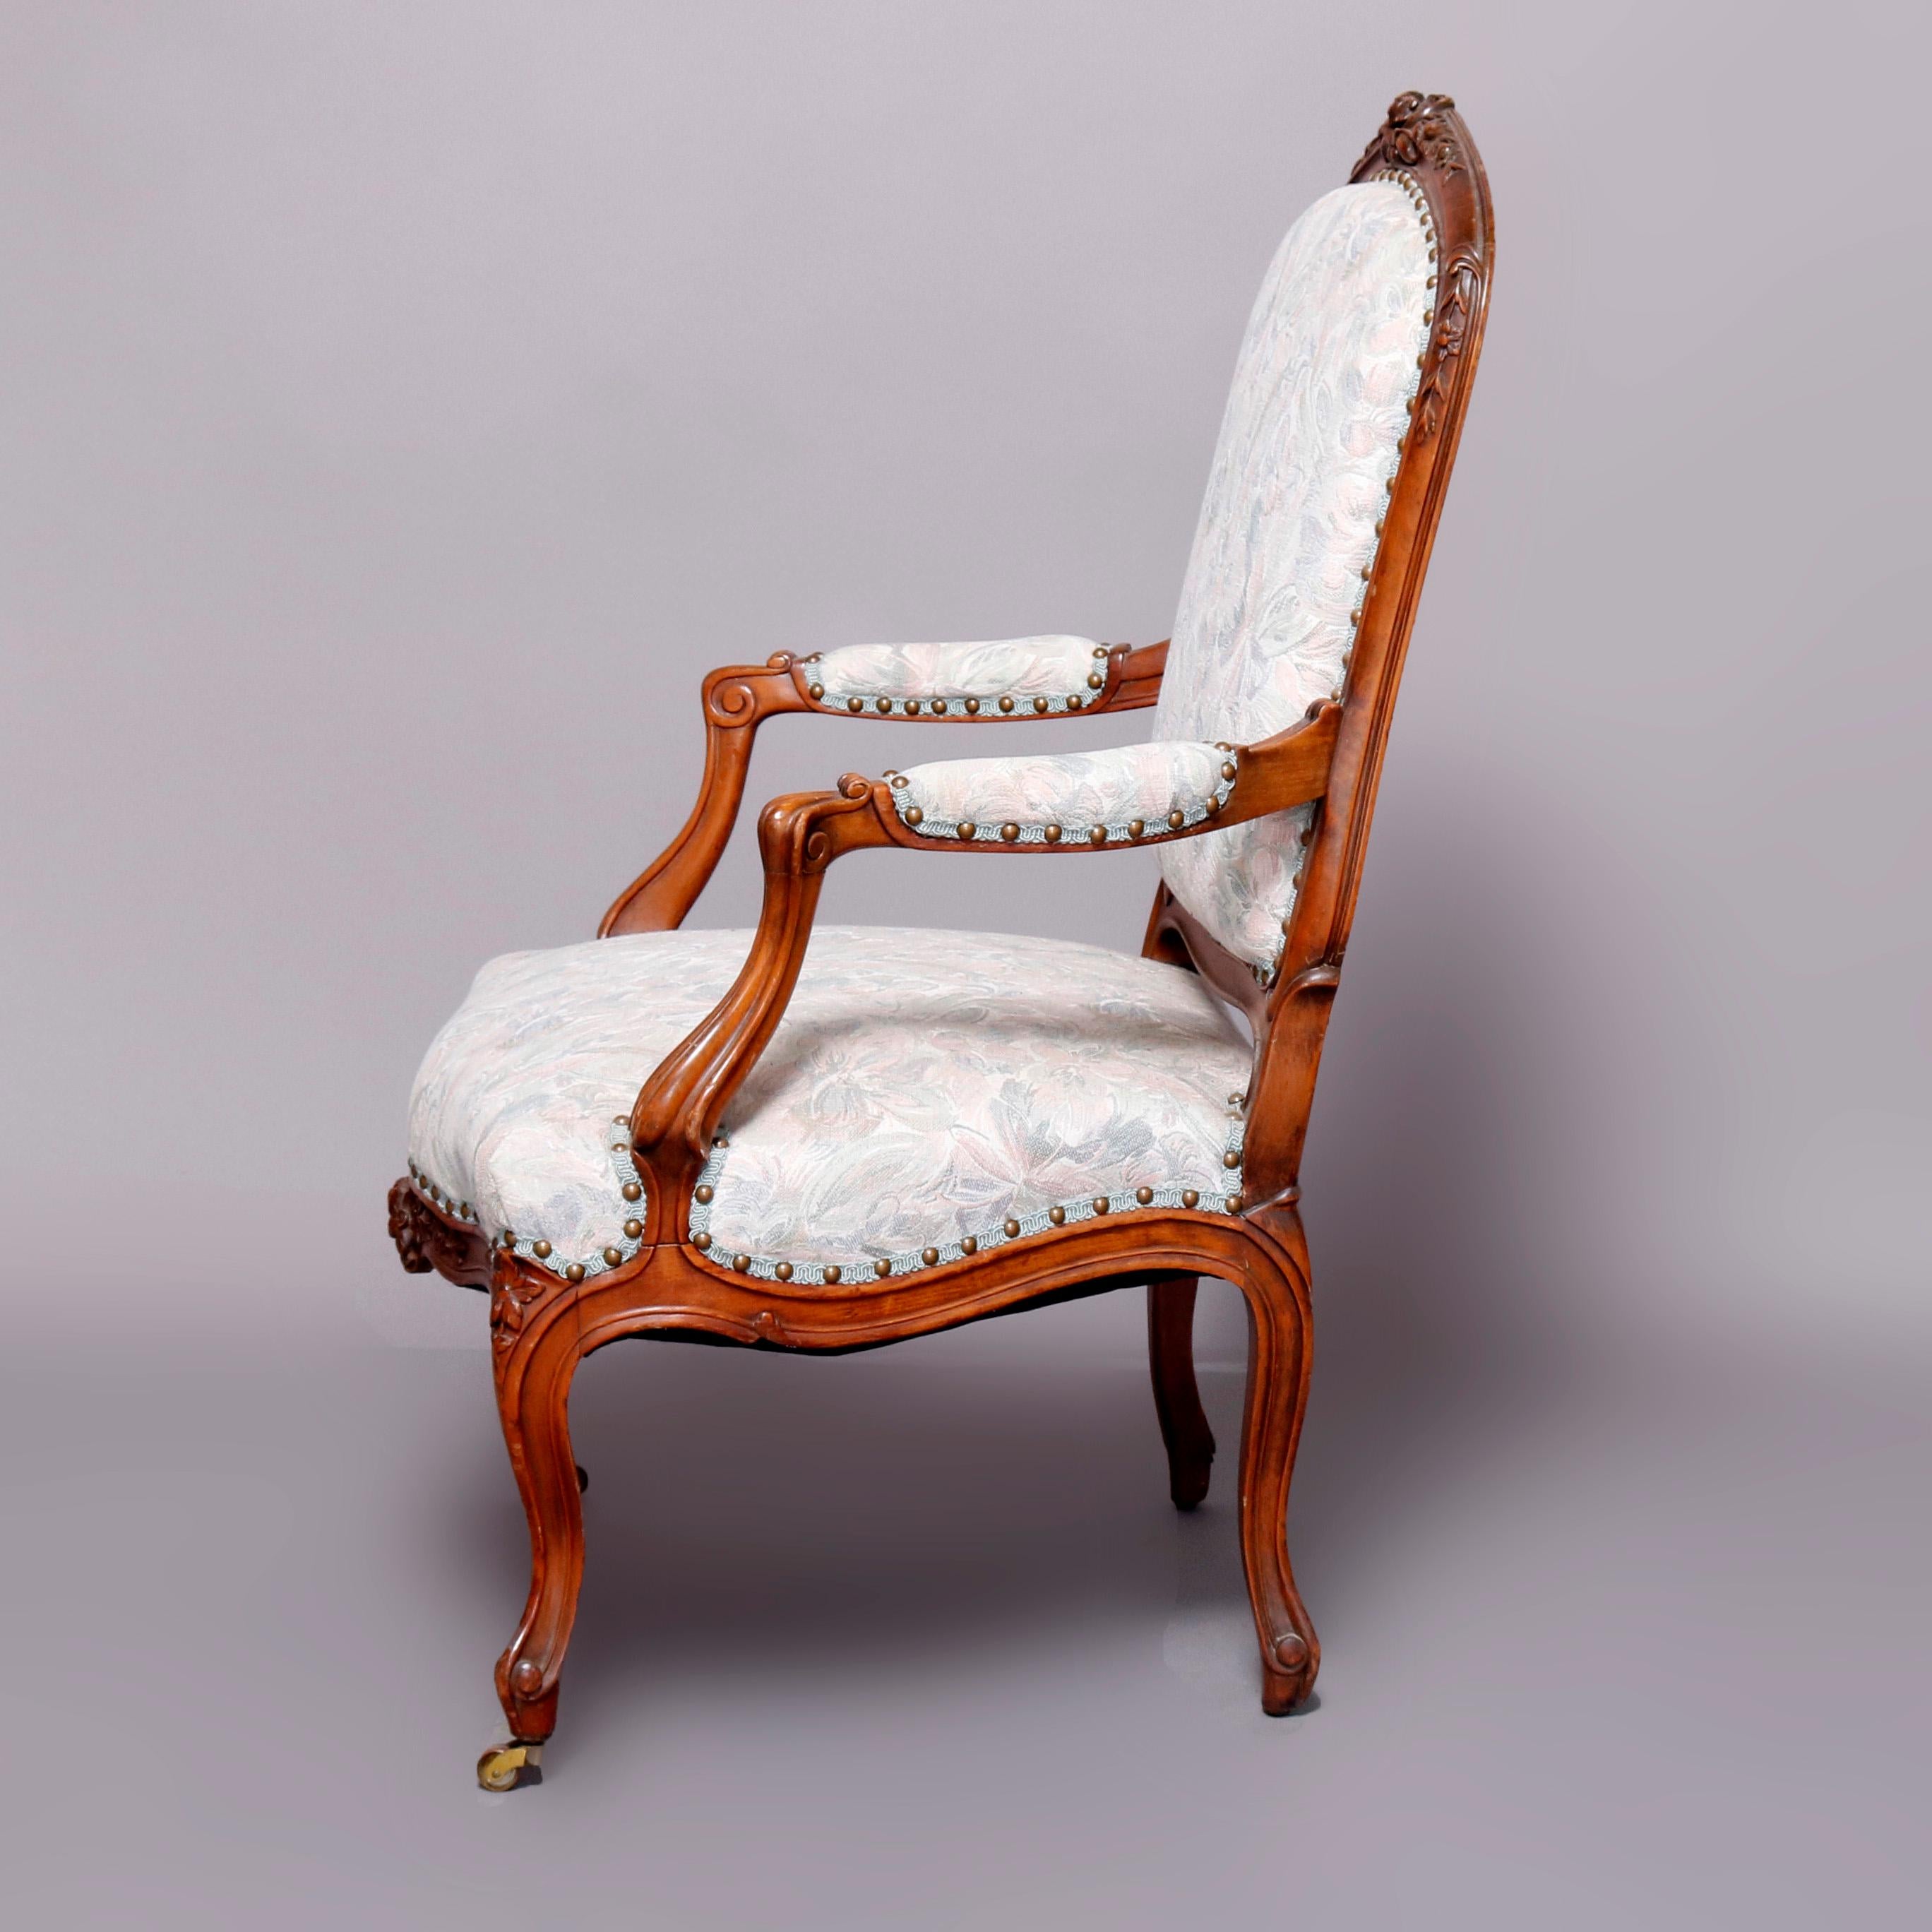 An antique French Louis XVI armchair offers fruitwood frame having floral carved crest, skirt and knees, upholstered seat, back and arms, raised on cabriole legs, 20th century

***DELIVERY NOTICE – Due to COVID-19 we are employing NO-CONTACT